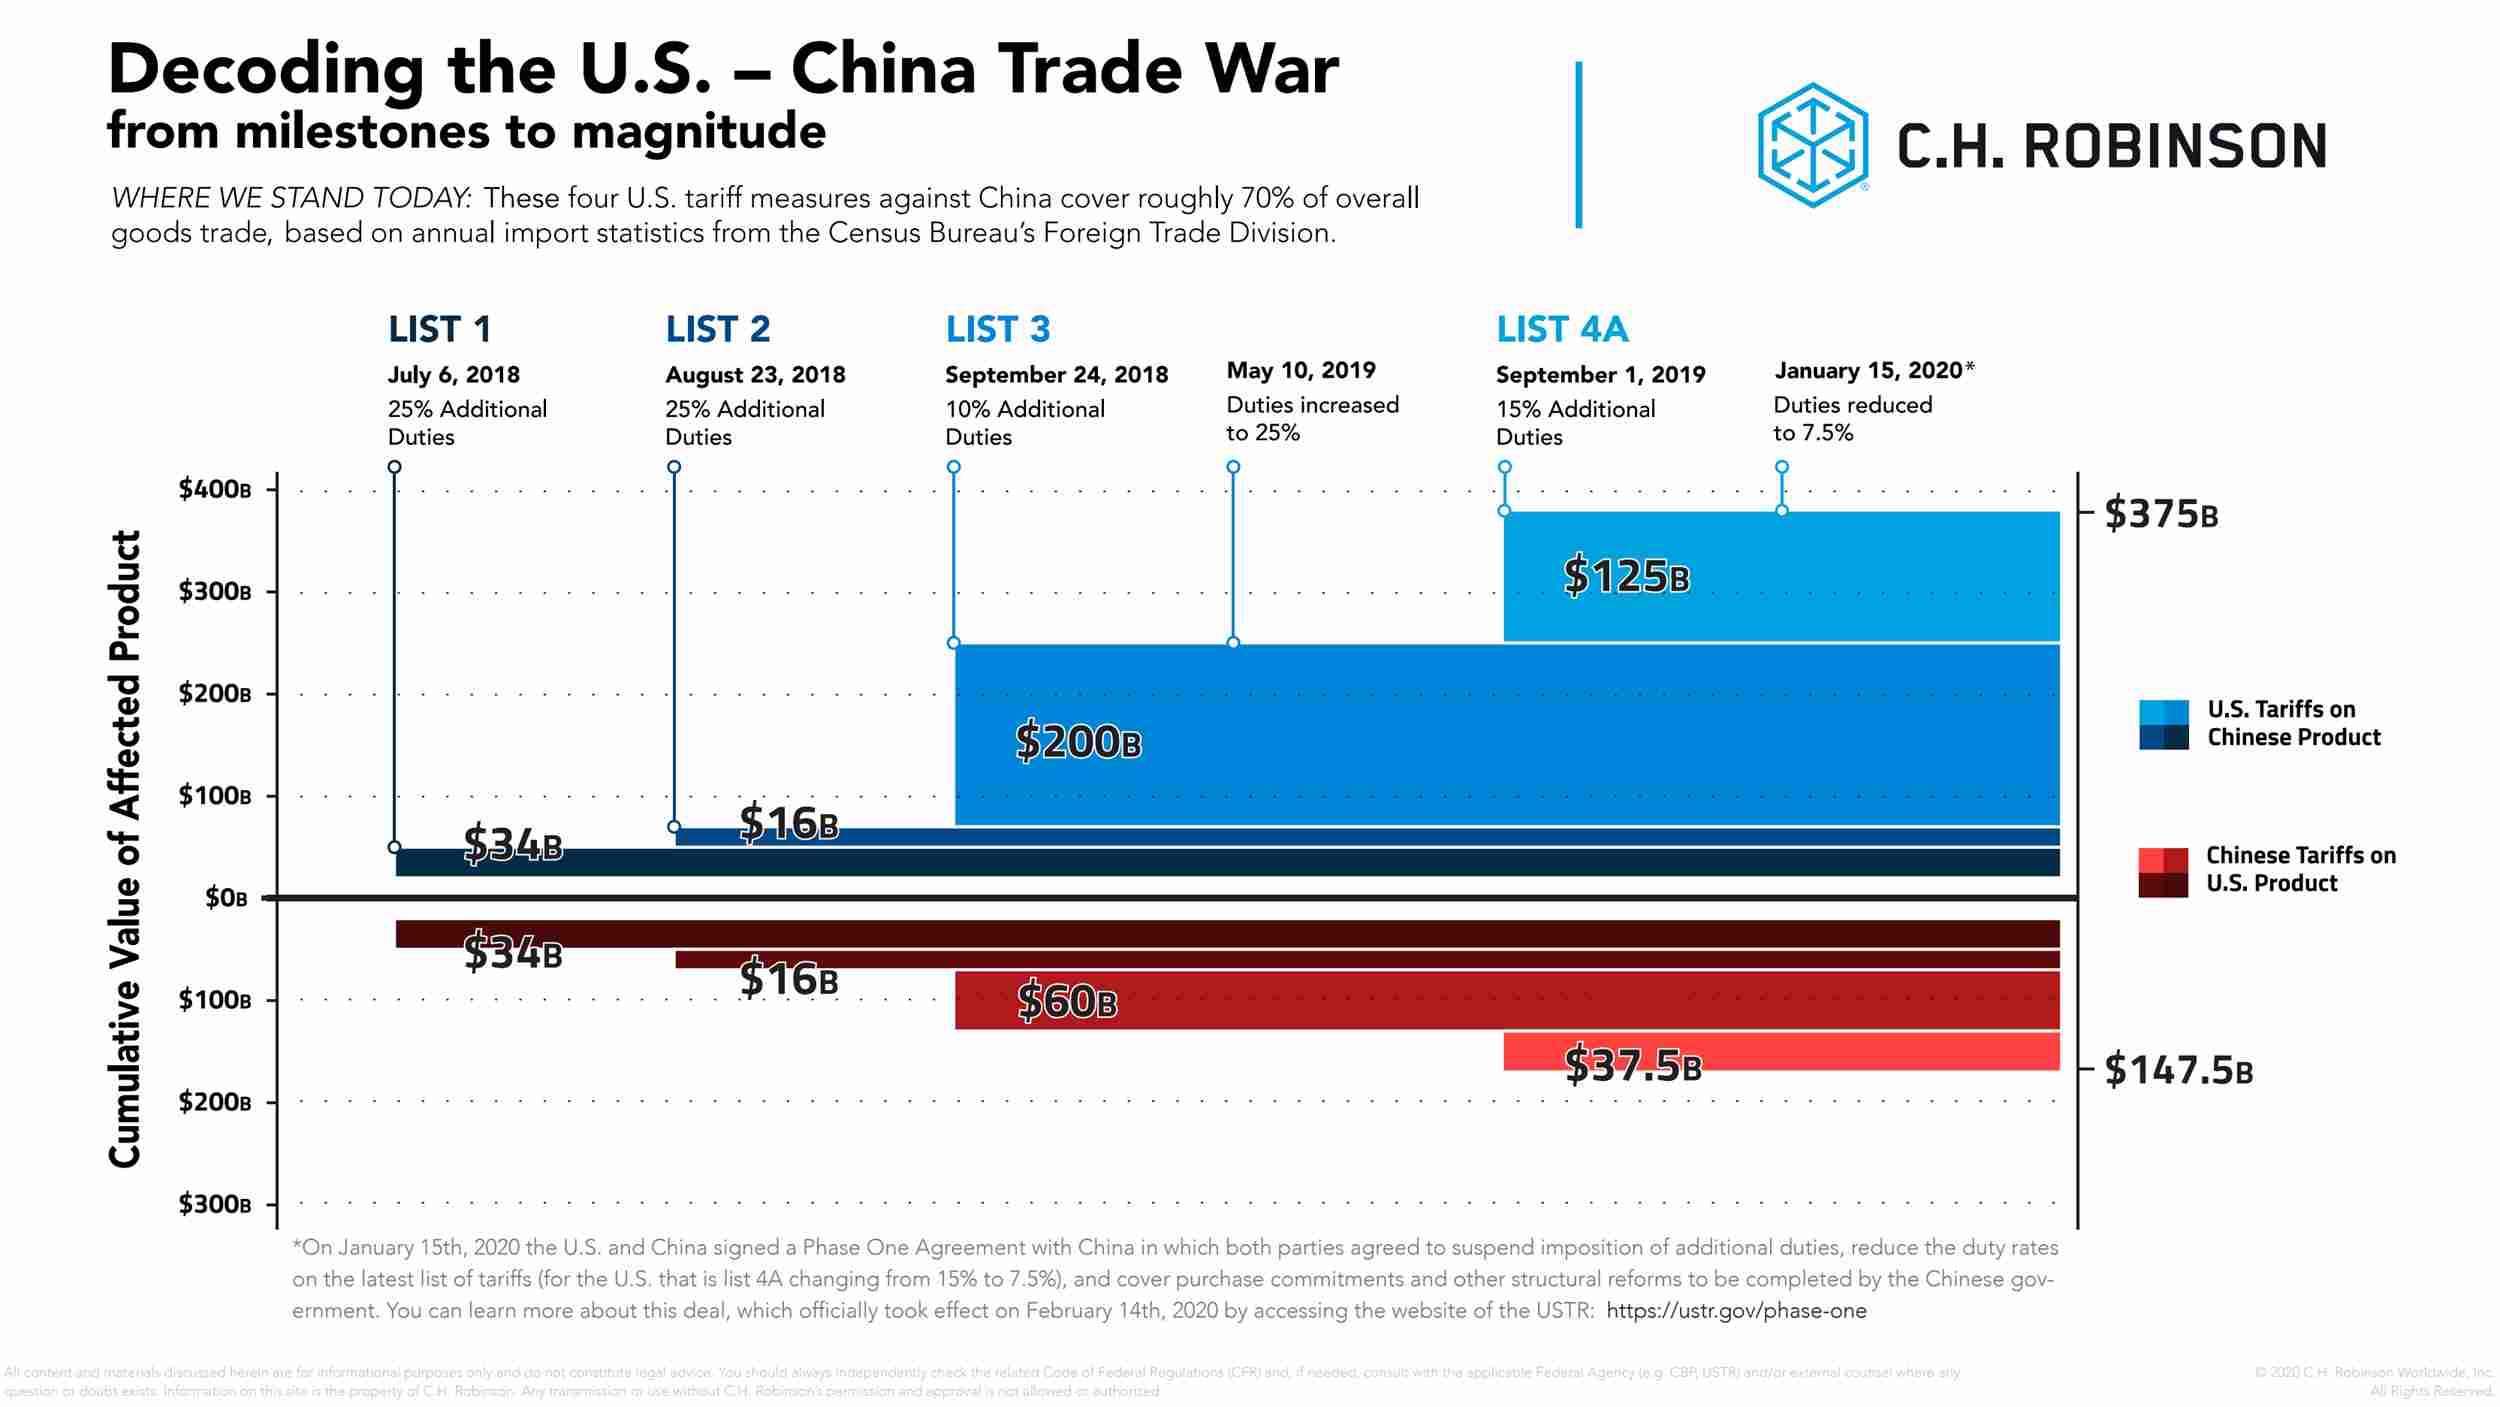 Graph depicting decoding of the US China trade war